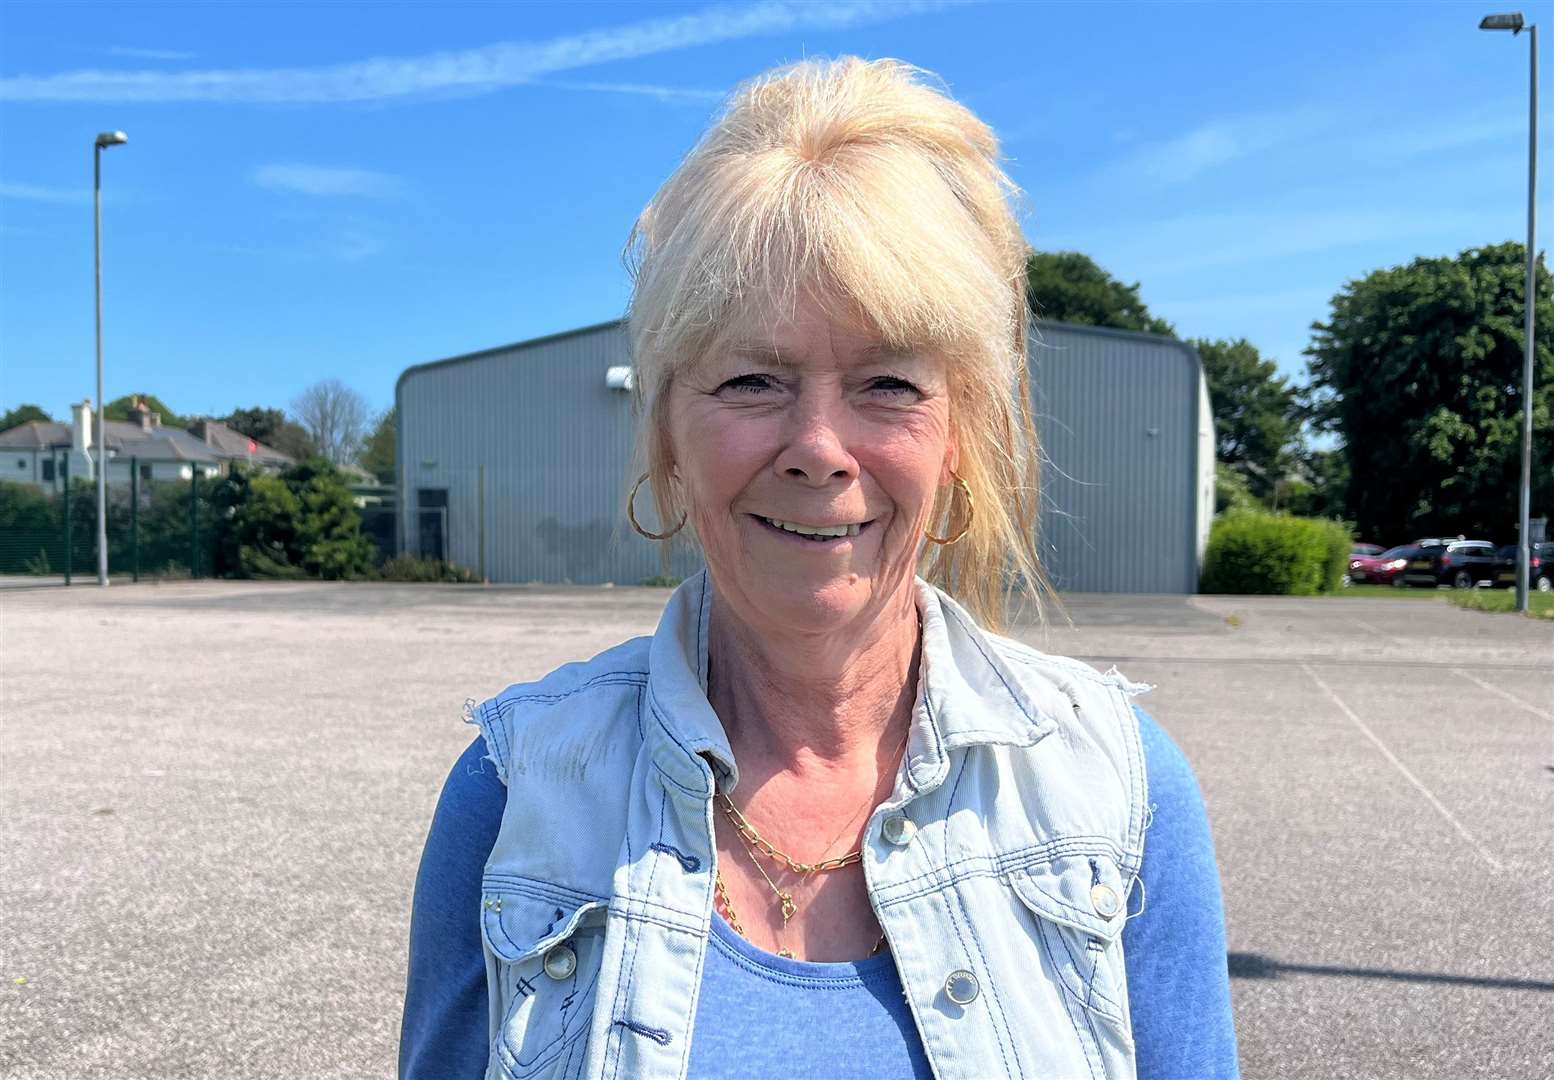 Diane Cook has seen someone urinating in bushes following the closure of the facilities